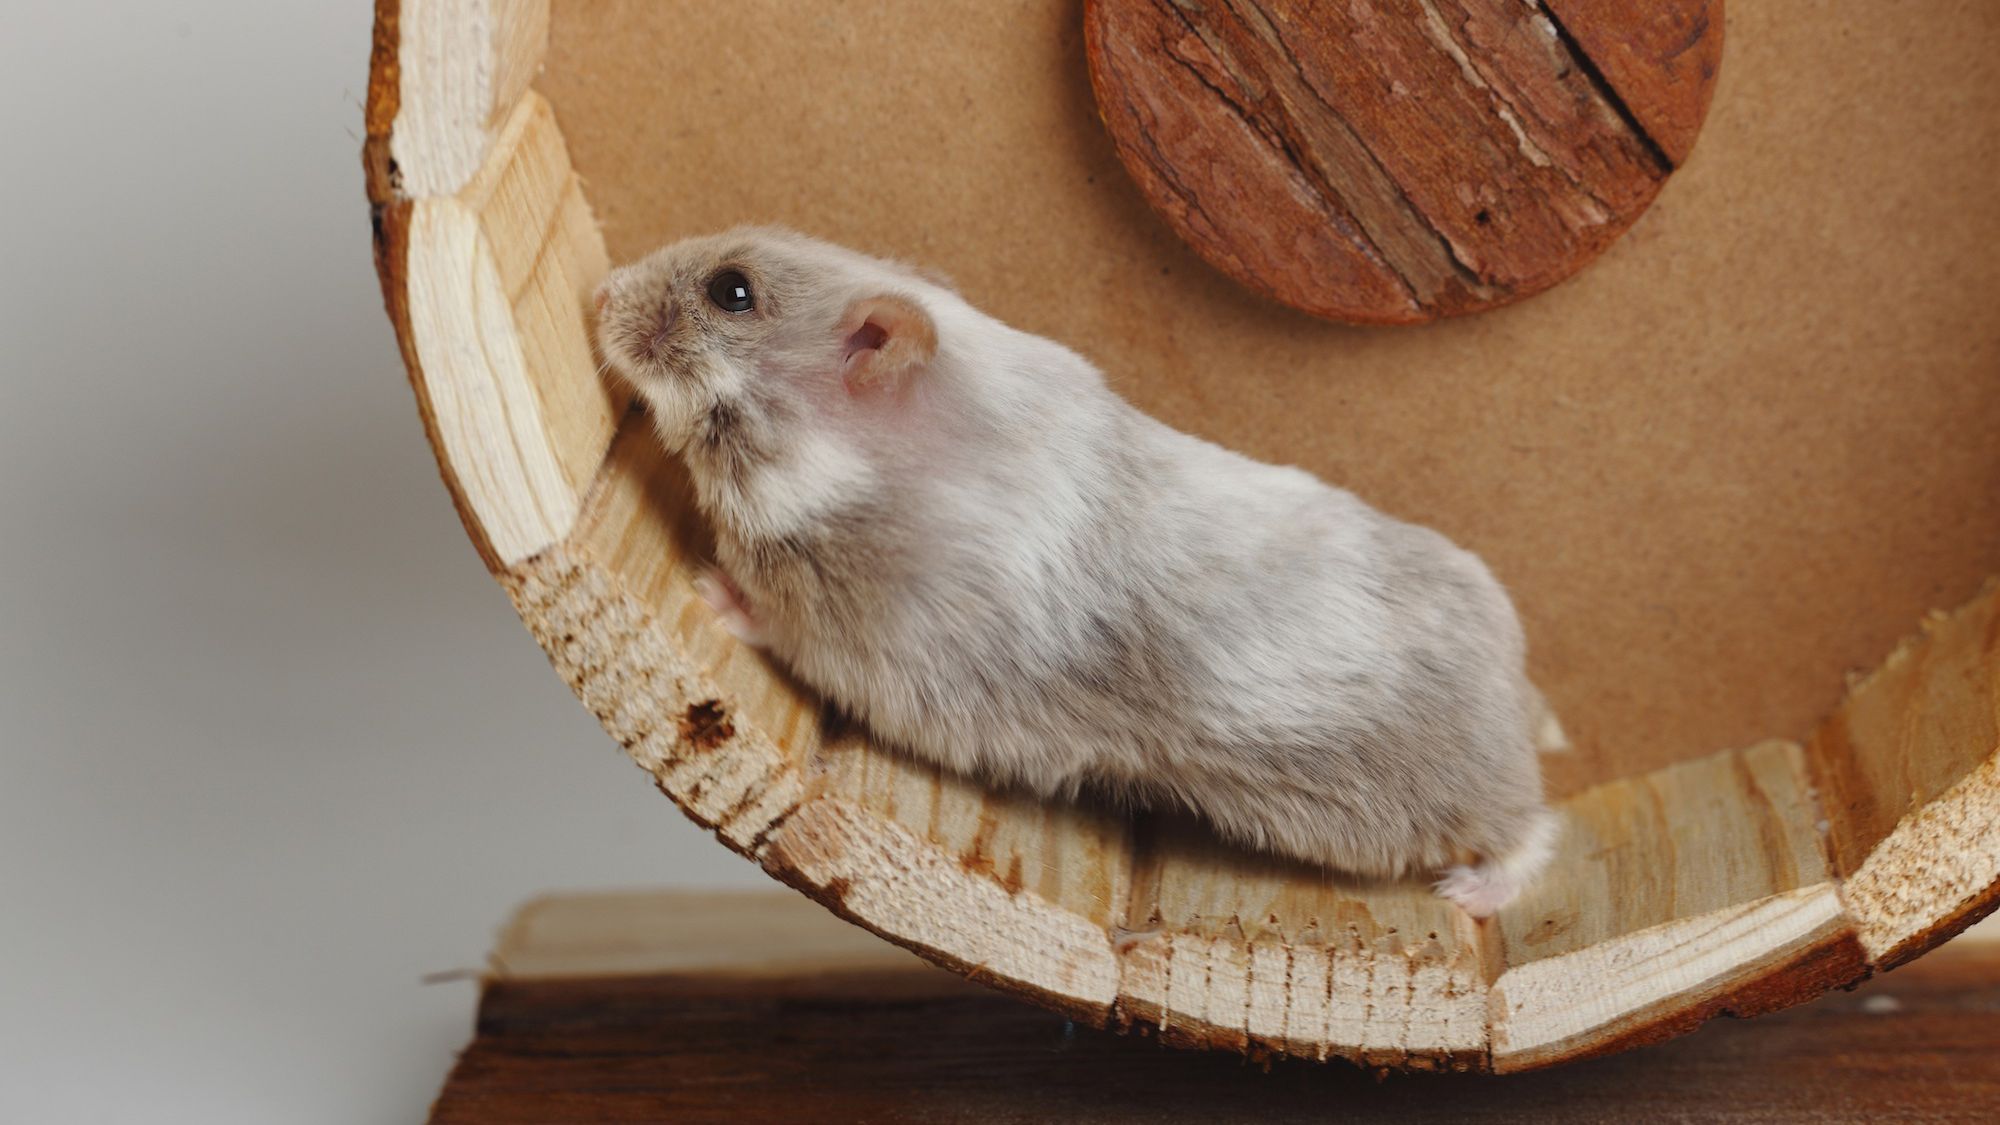 Keeping and Caring for Pet Campbell's Dwarf Russian Hamsters